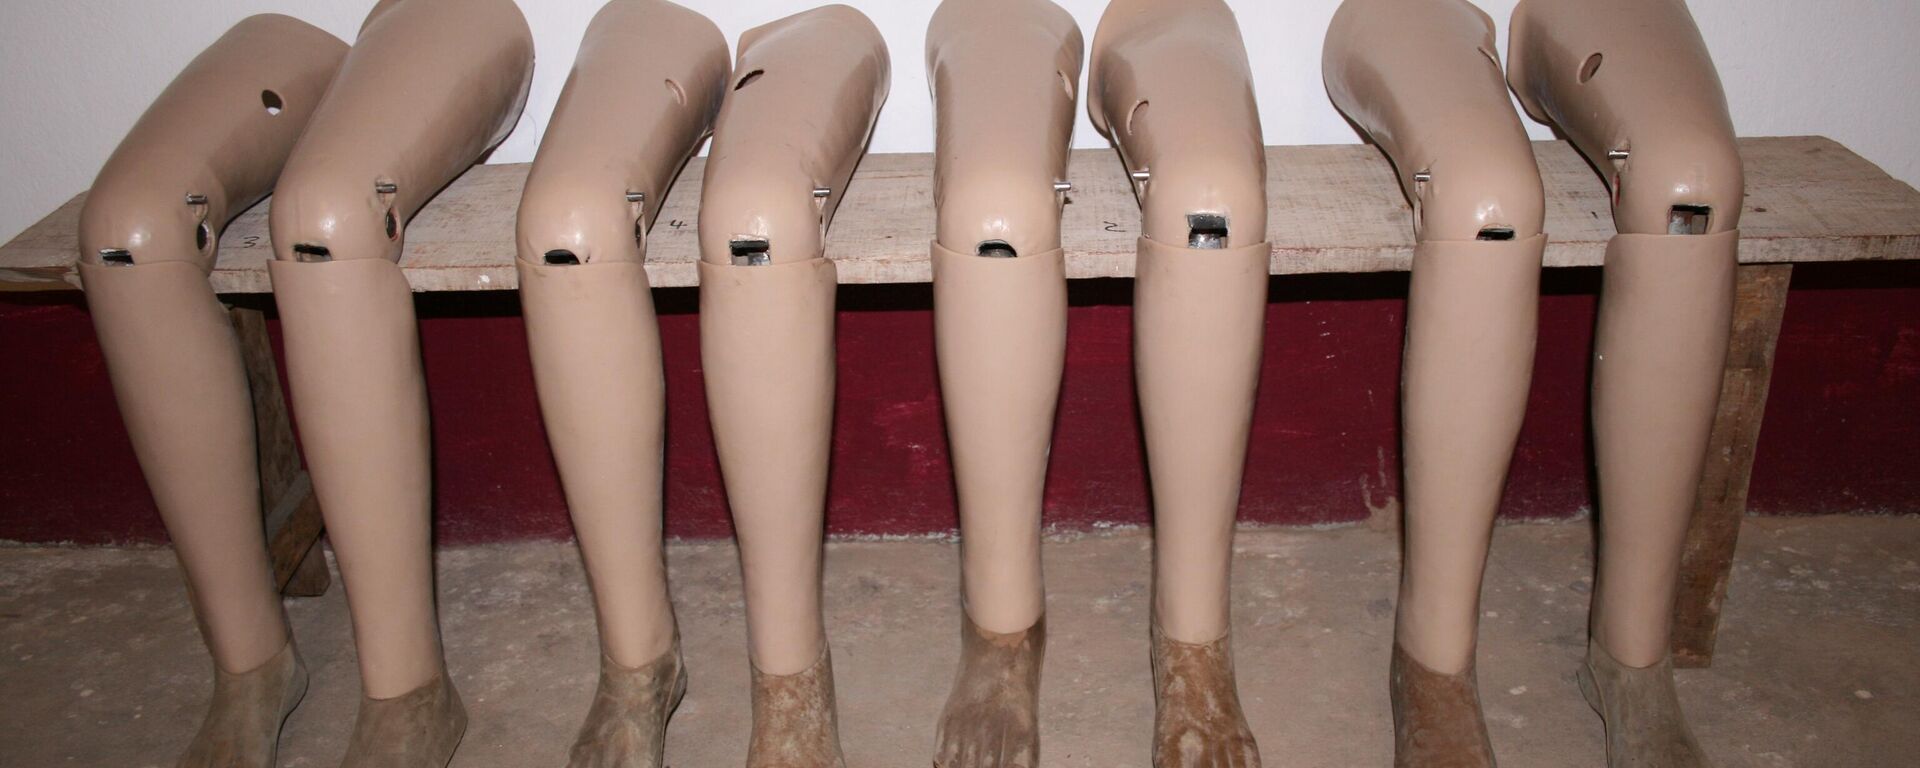 Prosthetic legs lined up for collection in Vientiane, Laos - Sputnik International, 1920, 05.09.2023